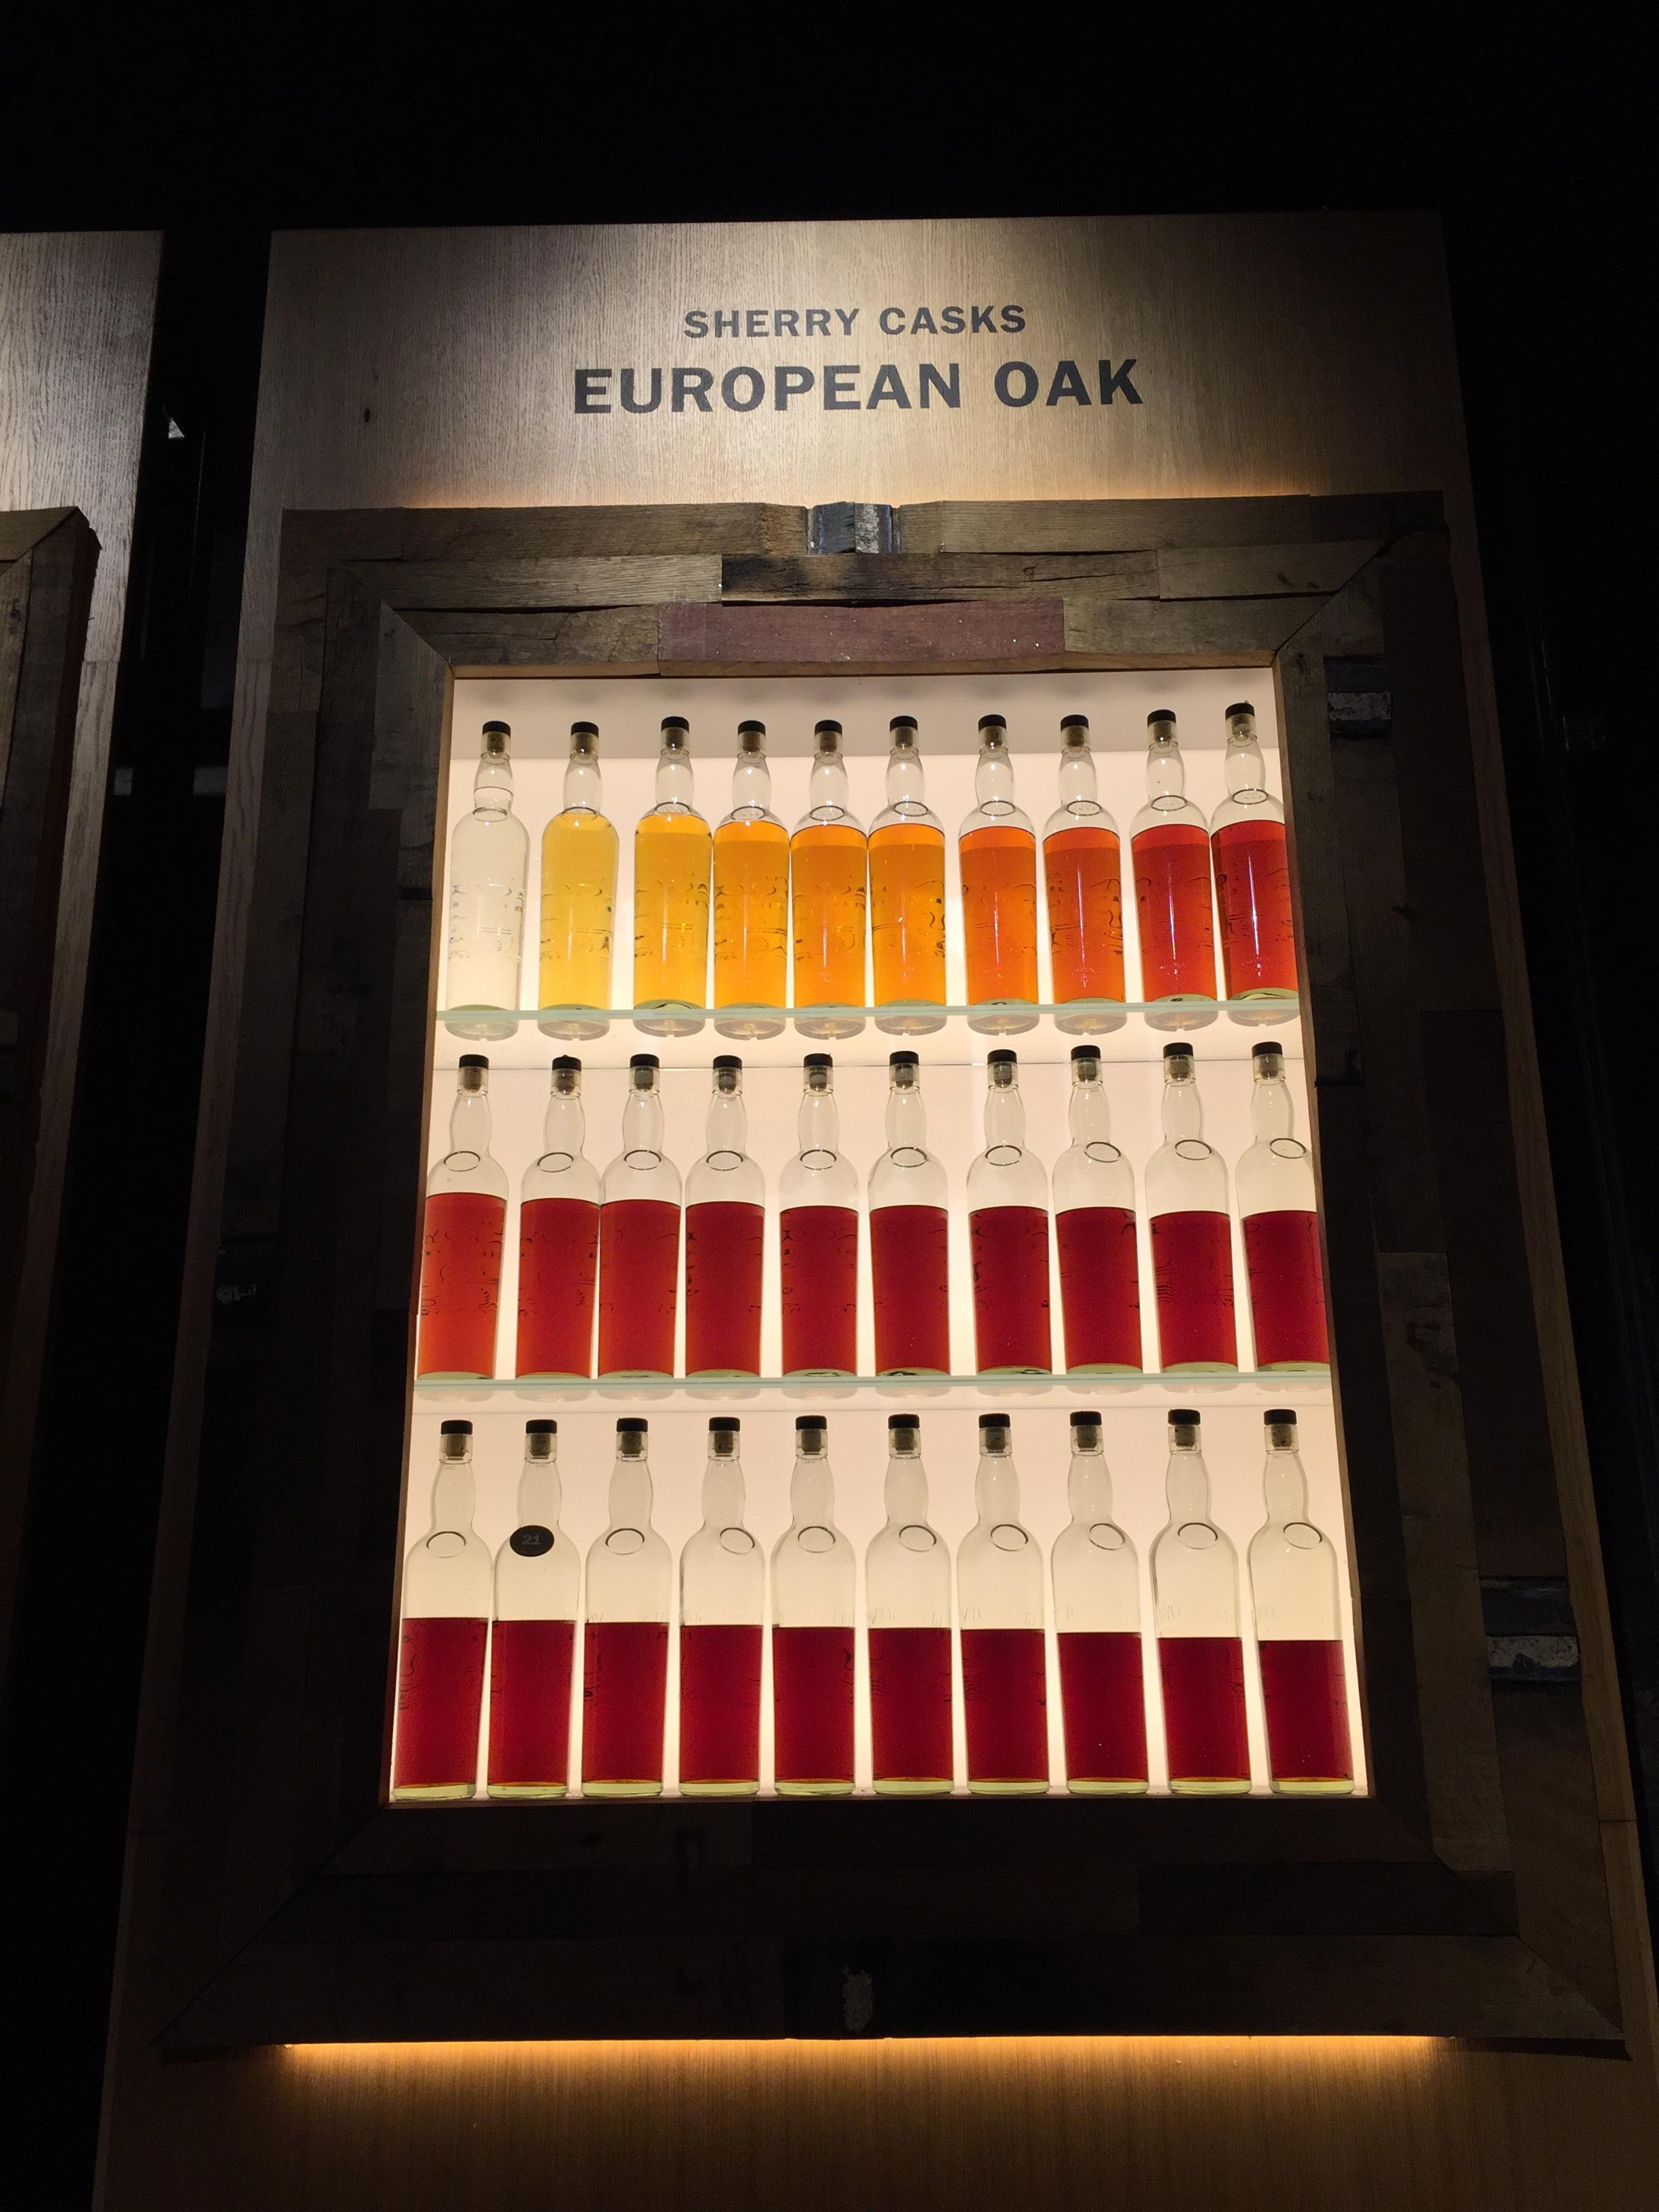 Each bottle is the same whiskey matured in the cask for one year more than the last